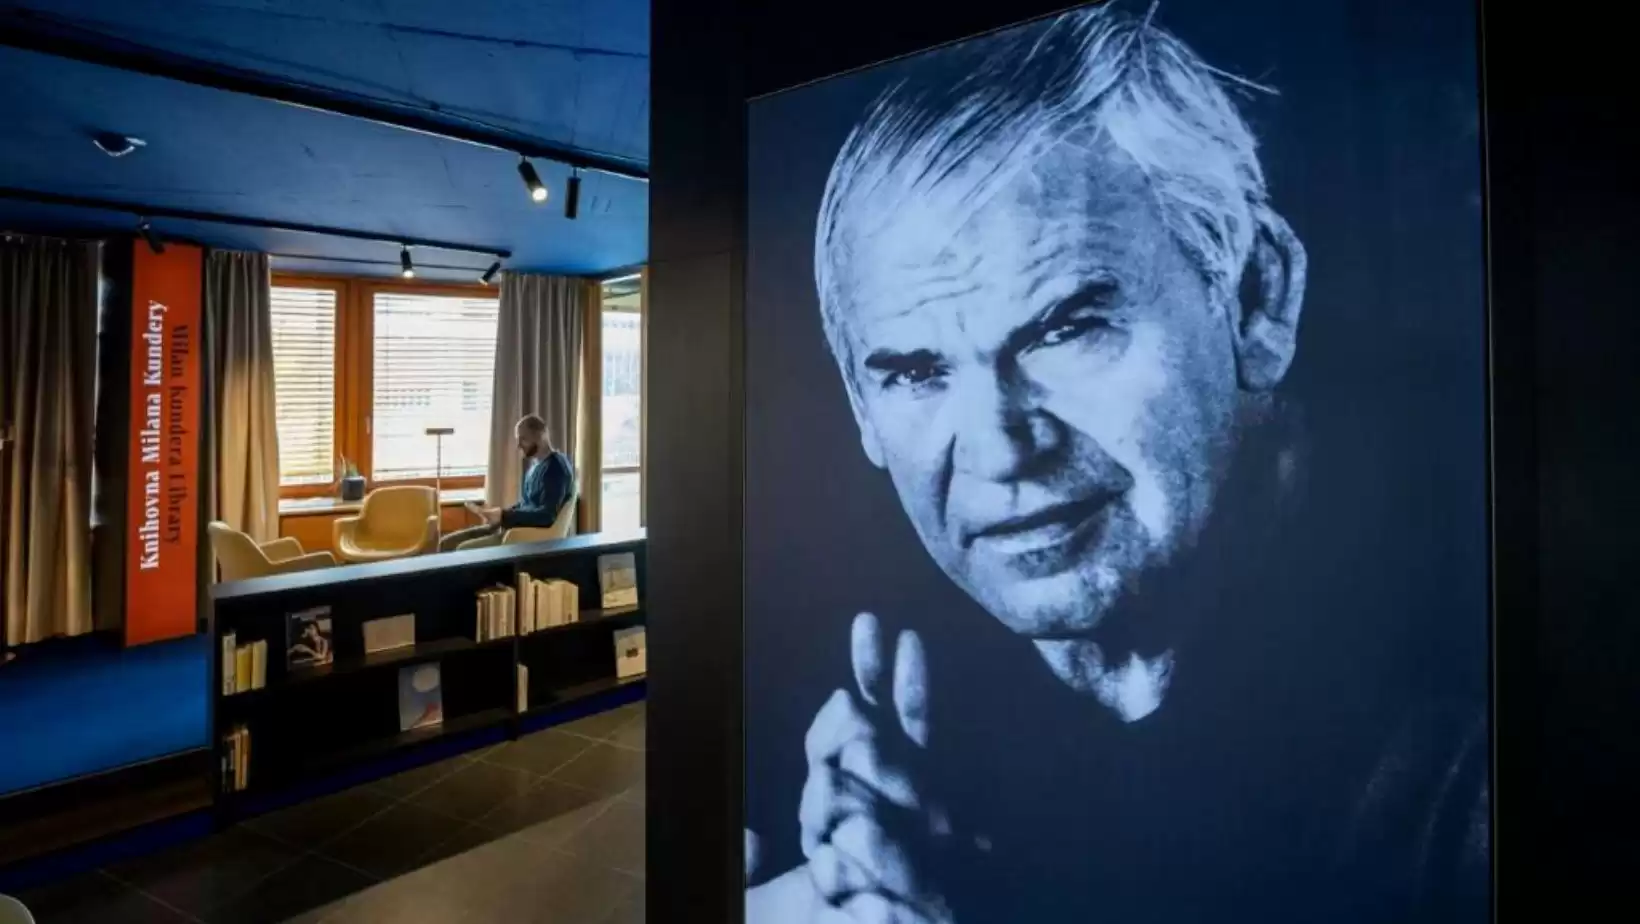 Brno's Rich Legacy: The City that Preserves Milan Kundera's Cultural Heritage